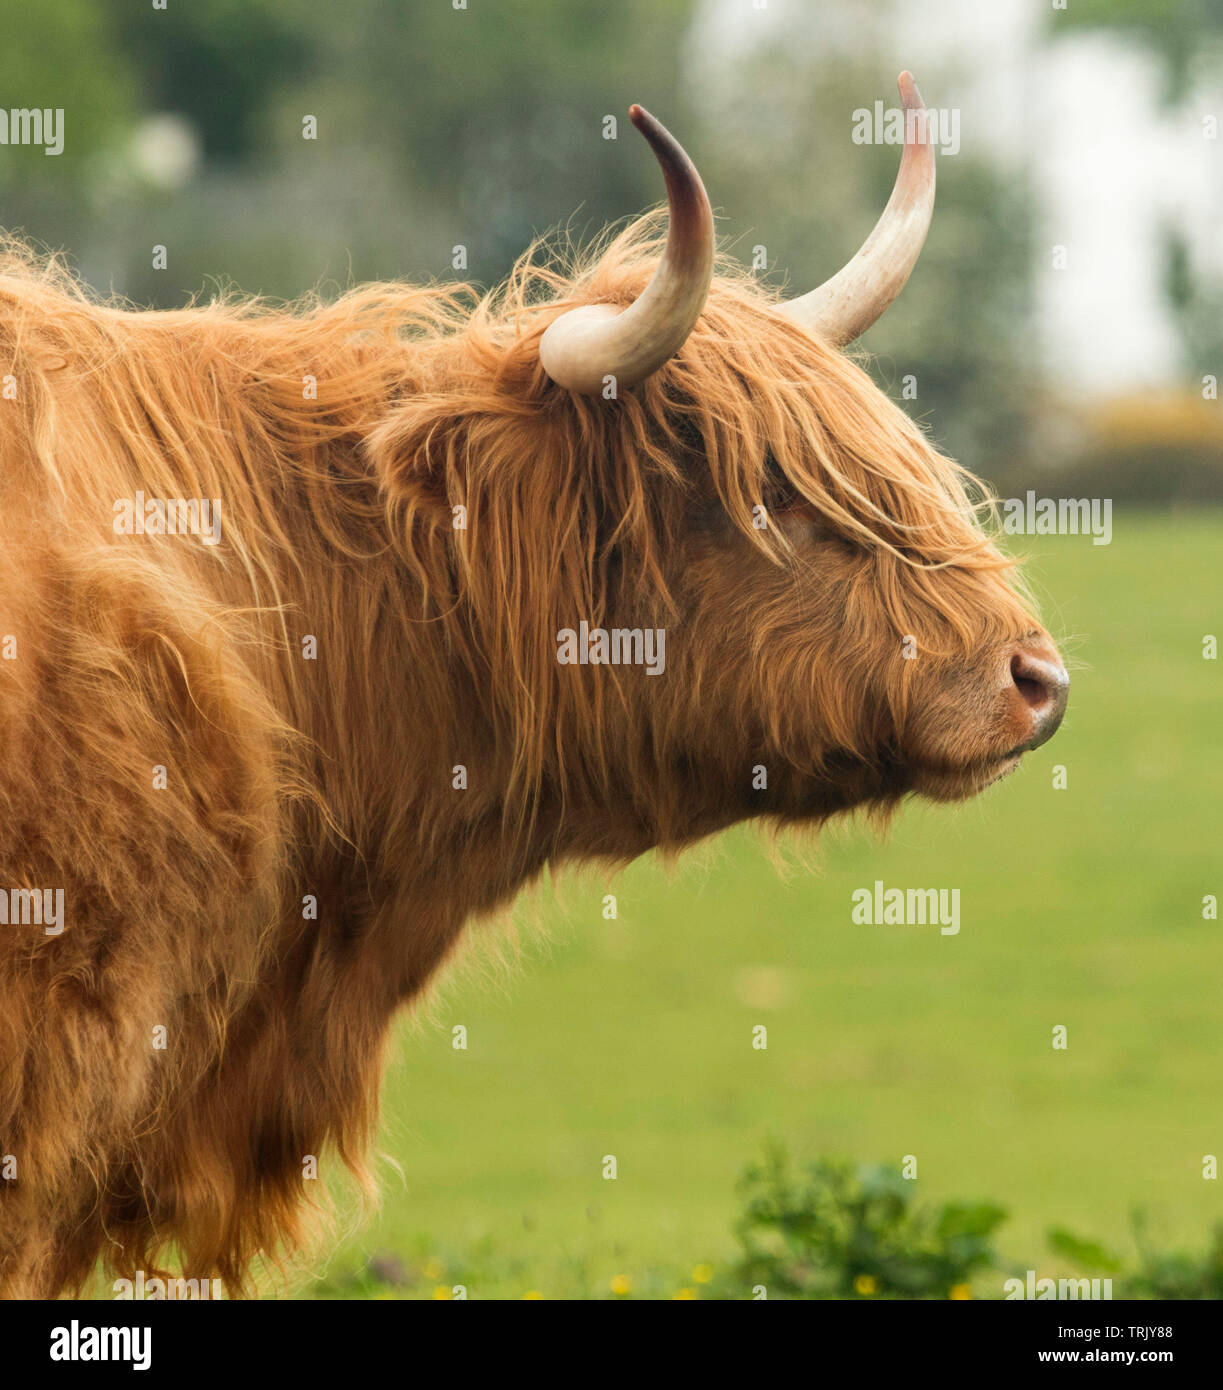 Head of highland cow with long shaggy ginger hair and large curved horns against background of green vegetation in Scottish highlands Stock Photo